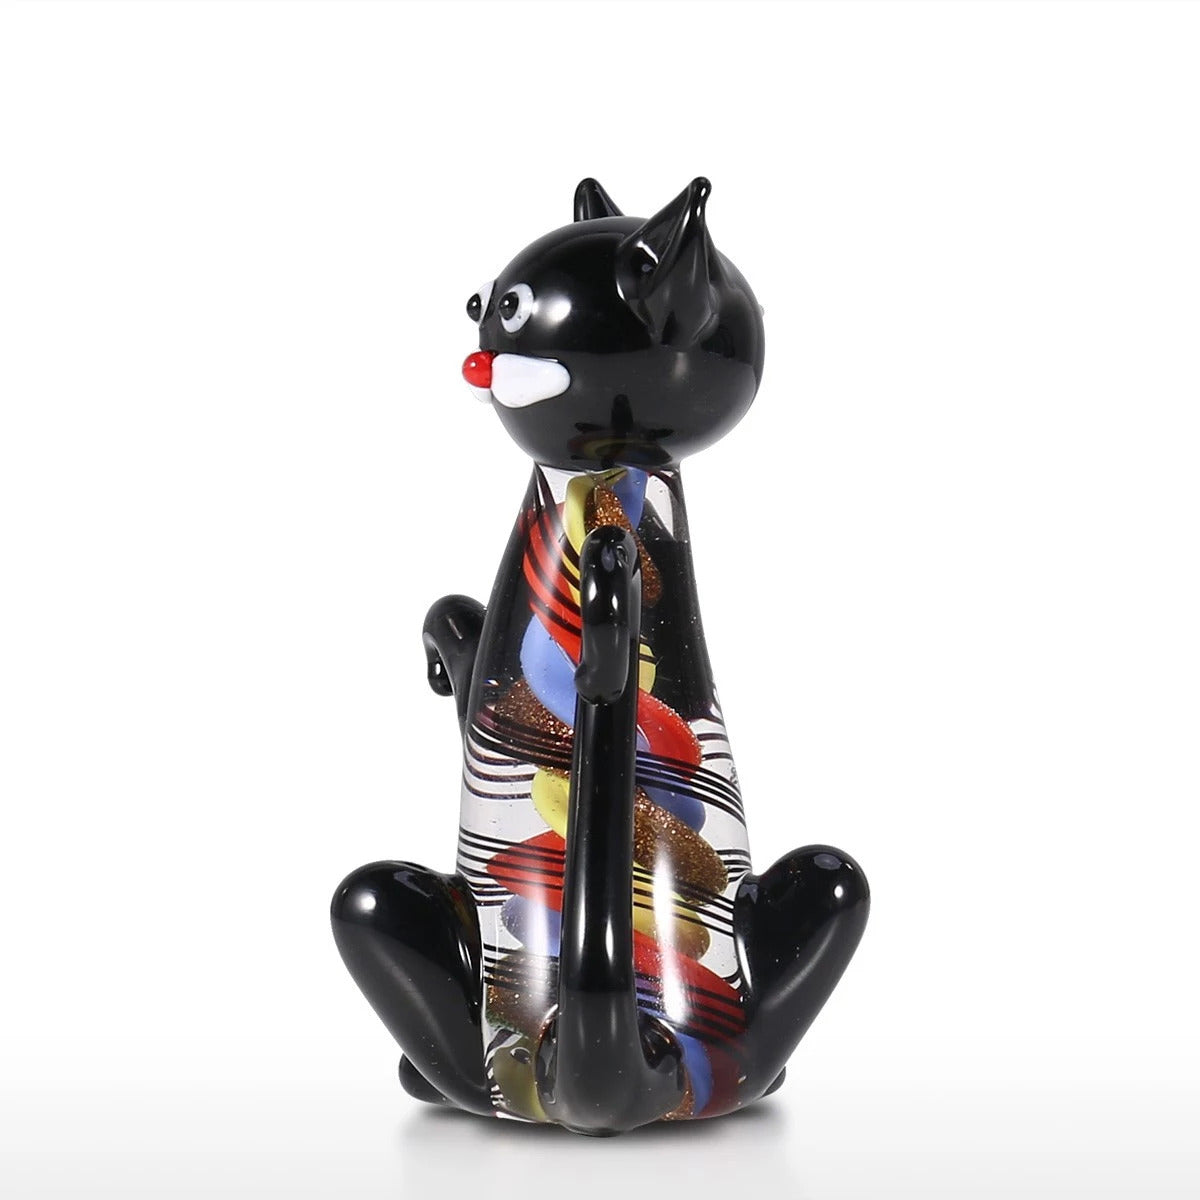 Glass Christmas Ornaments with Black Cat Figurines